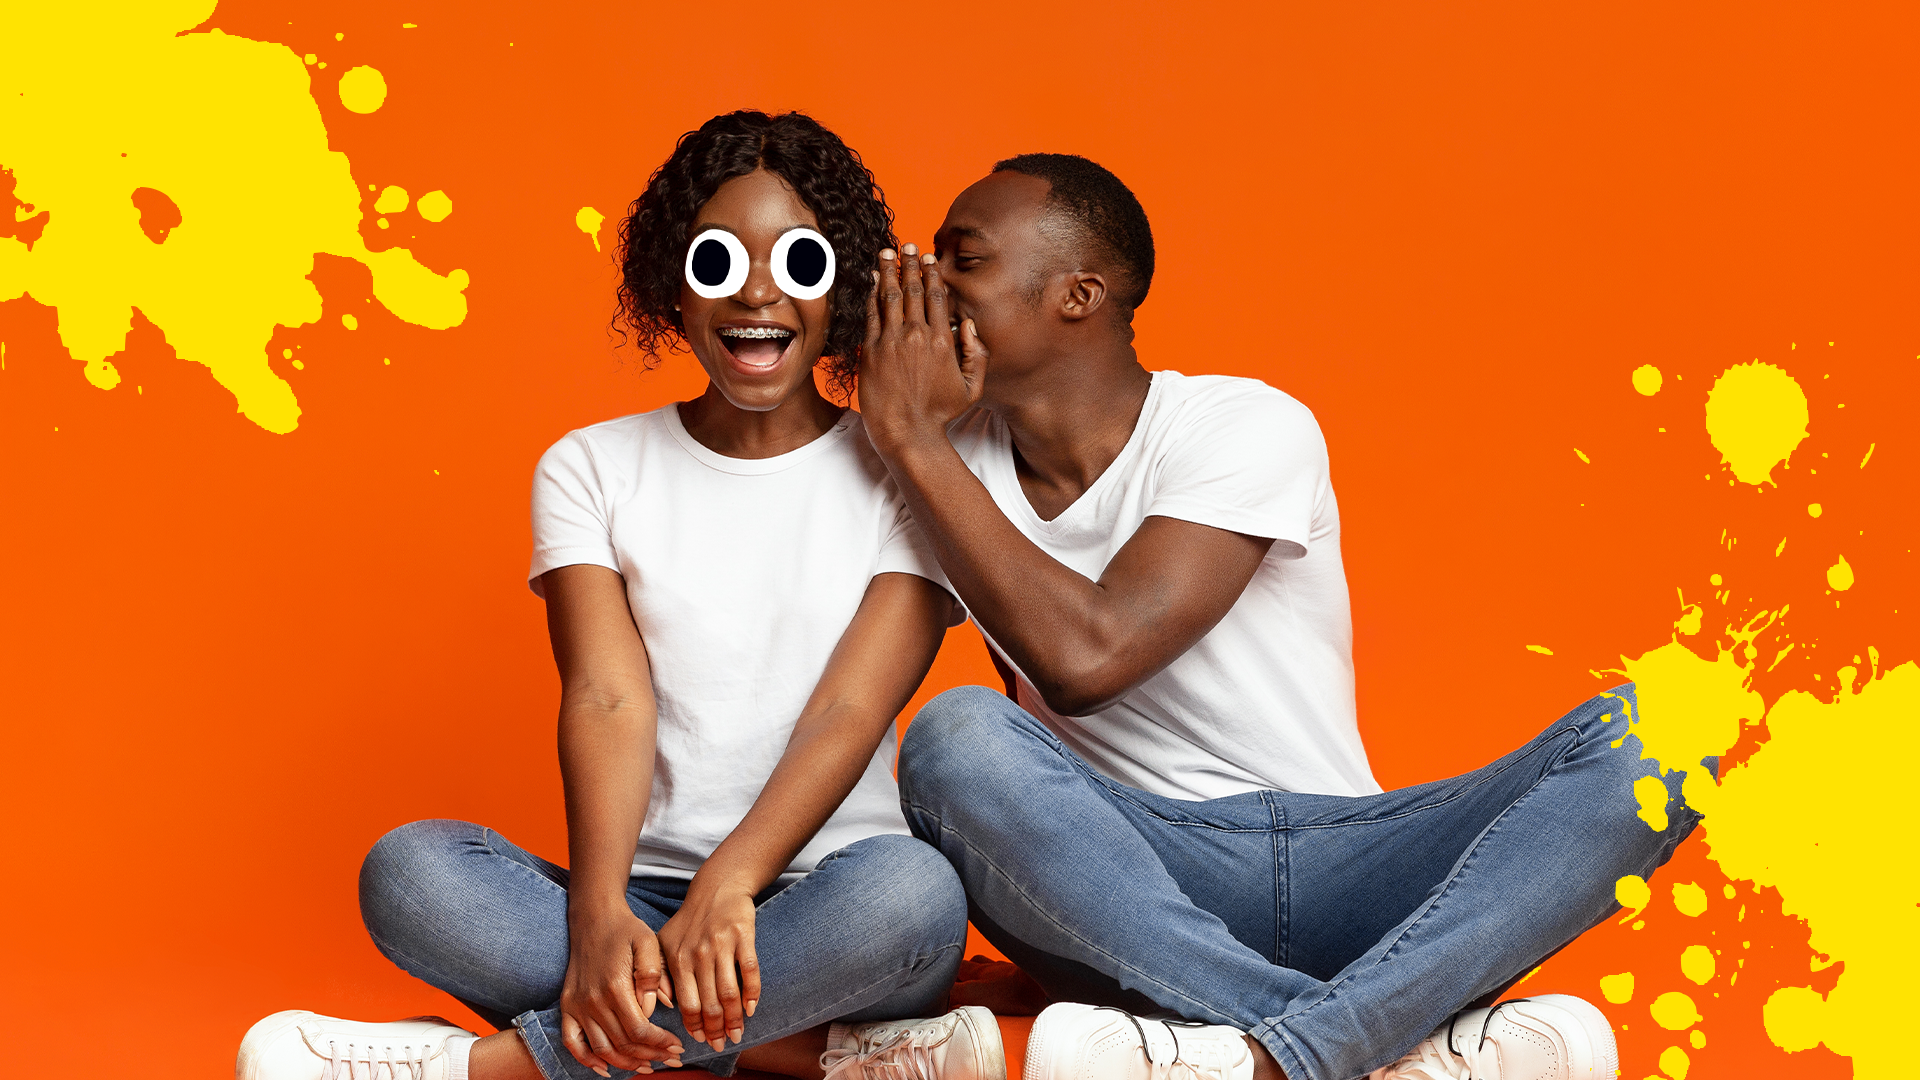 Man whispering to woman on orange background with splats